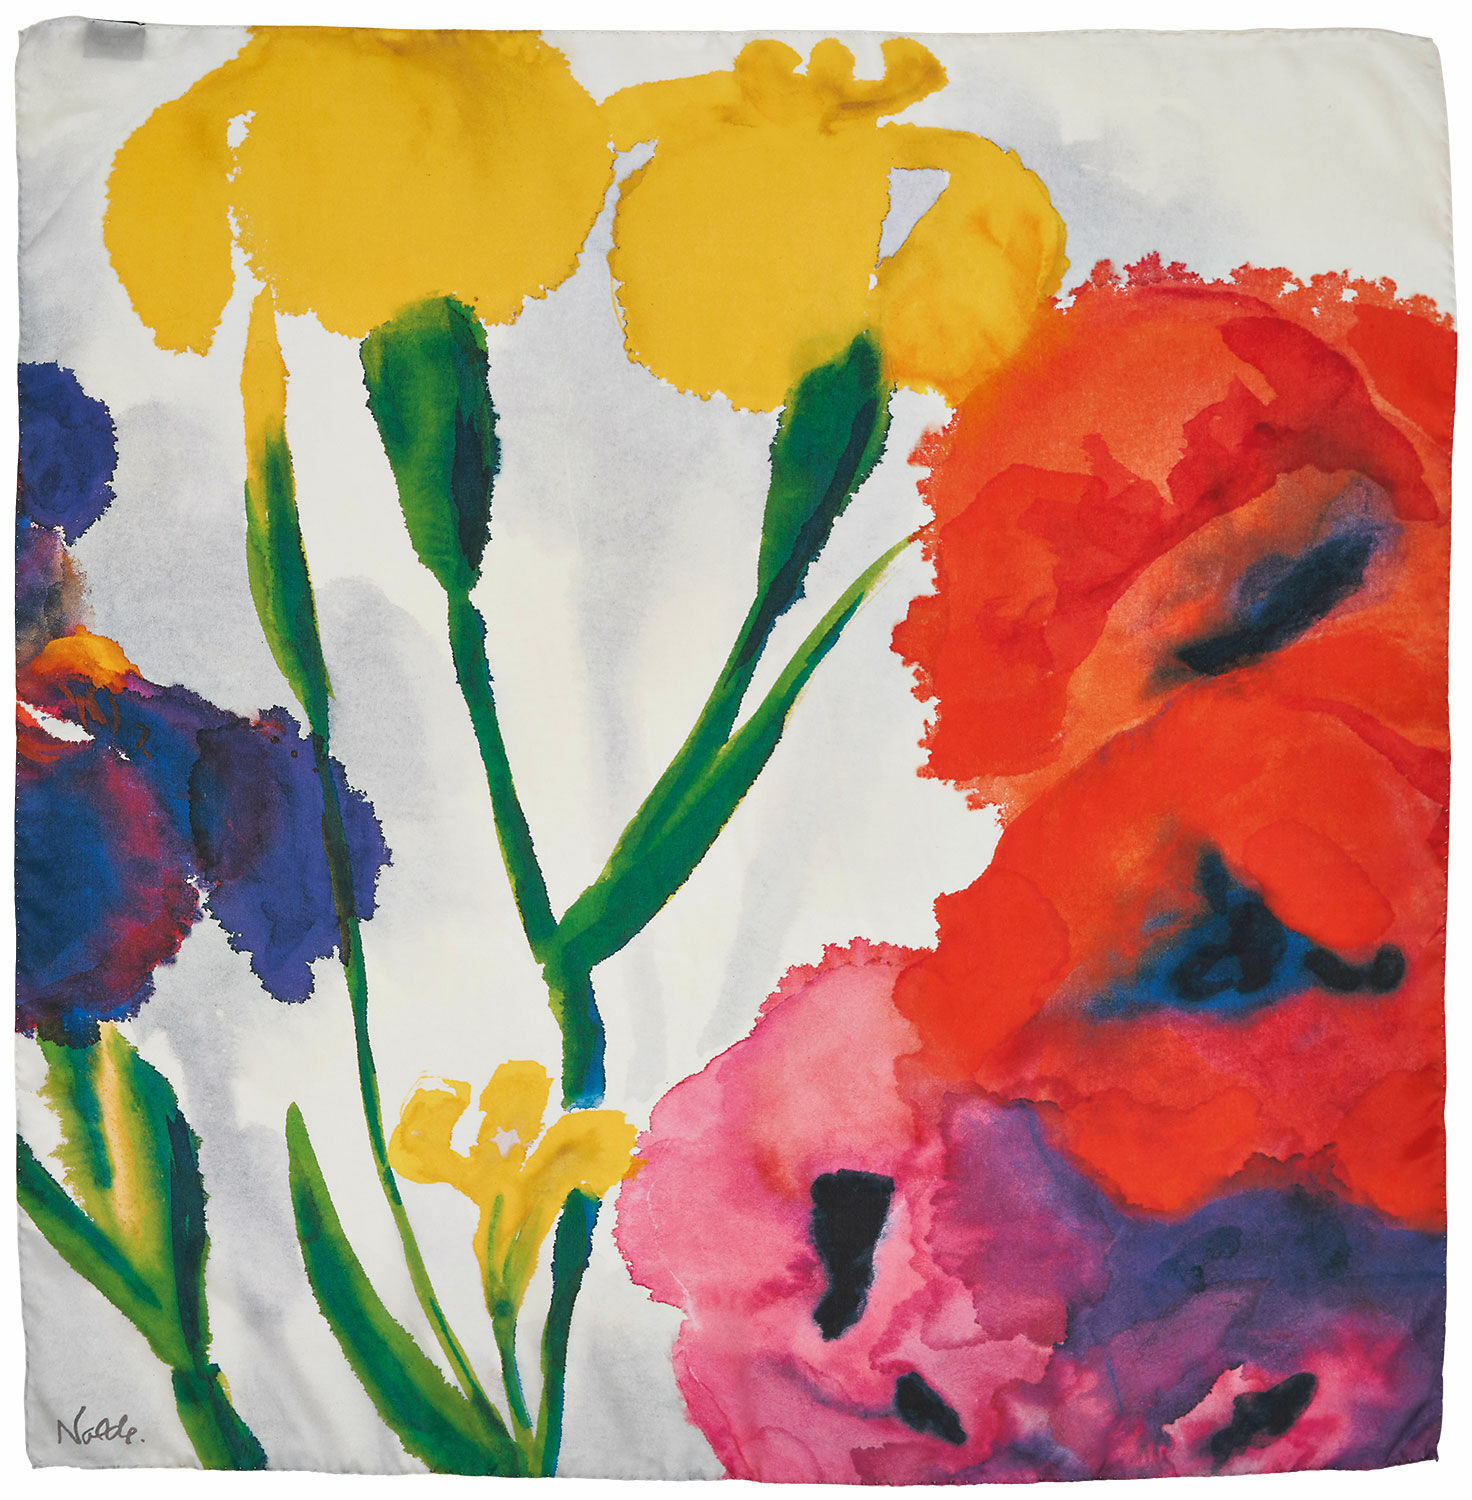 Silk scarf "Irises and Three Poppies (Yellow, Violet, Red)" by Emil Nolde